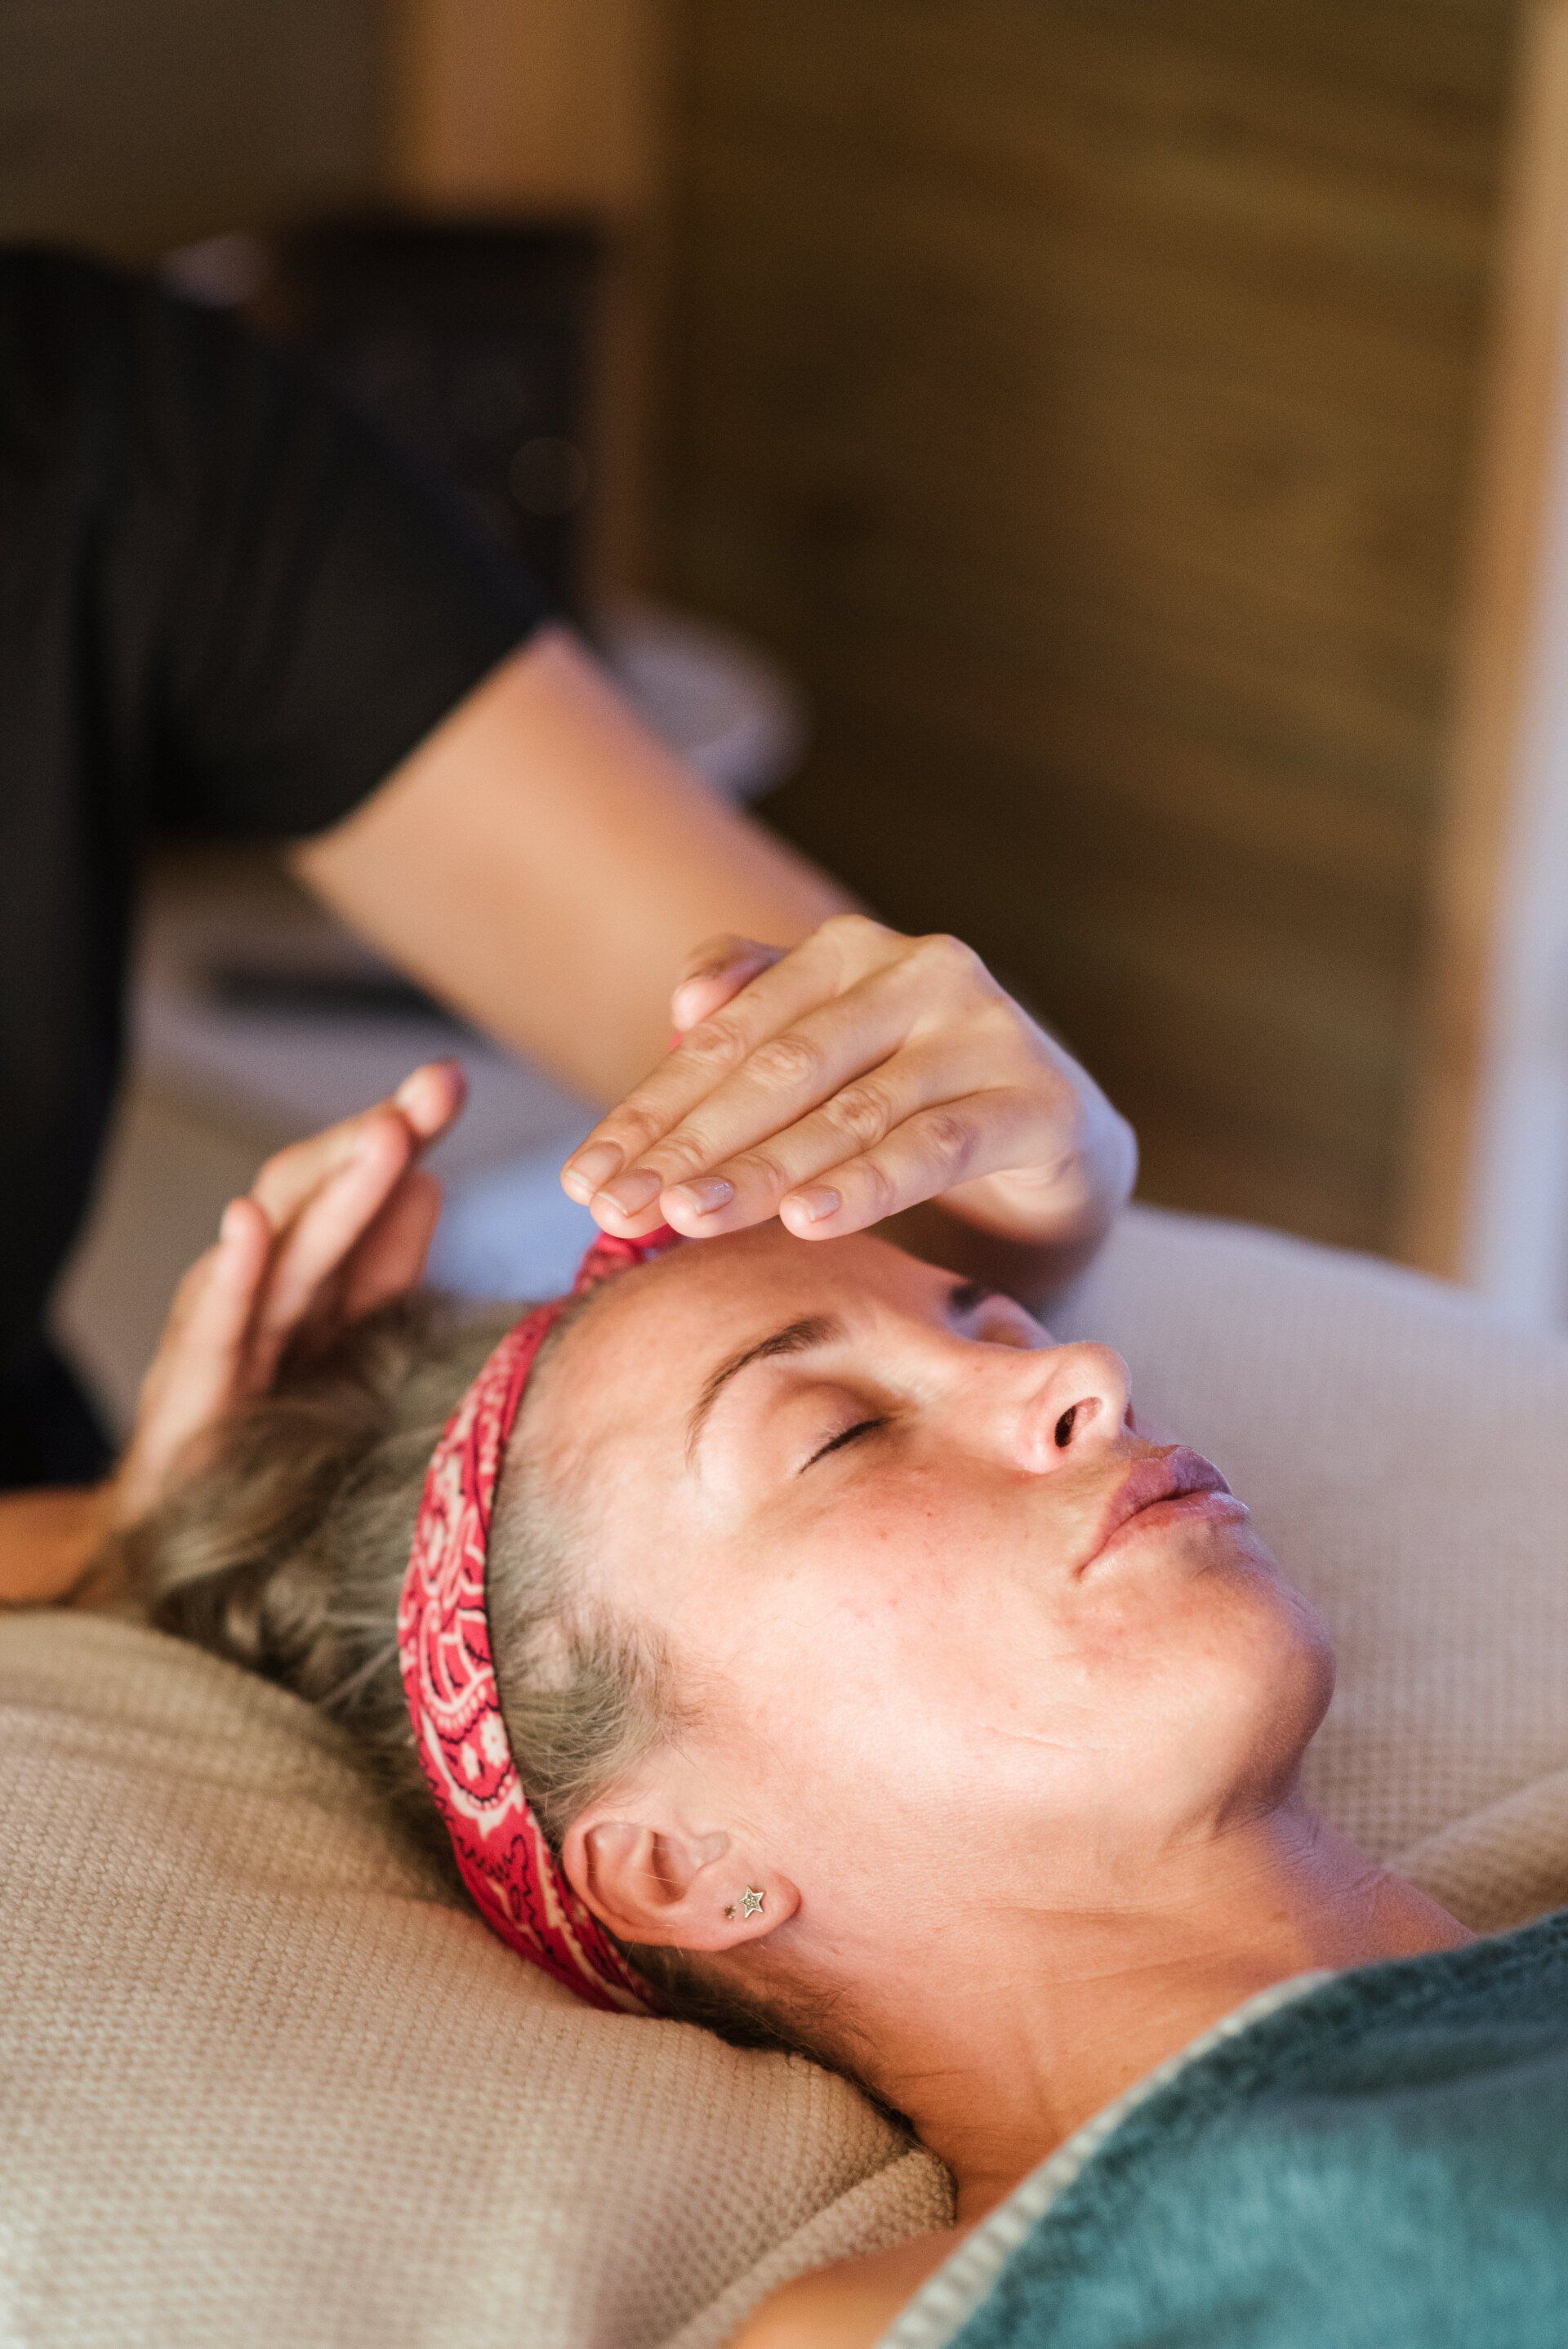 A woman is getting a massage on her forehead at a spa.